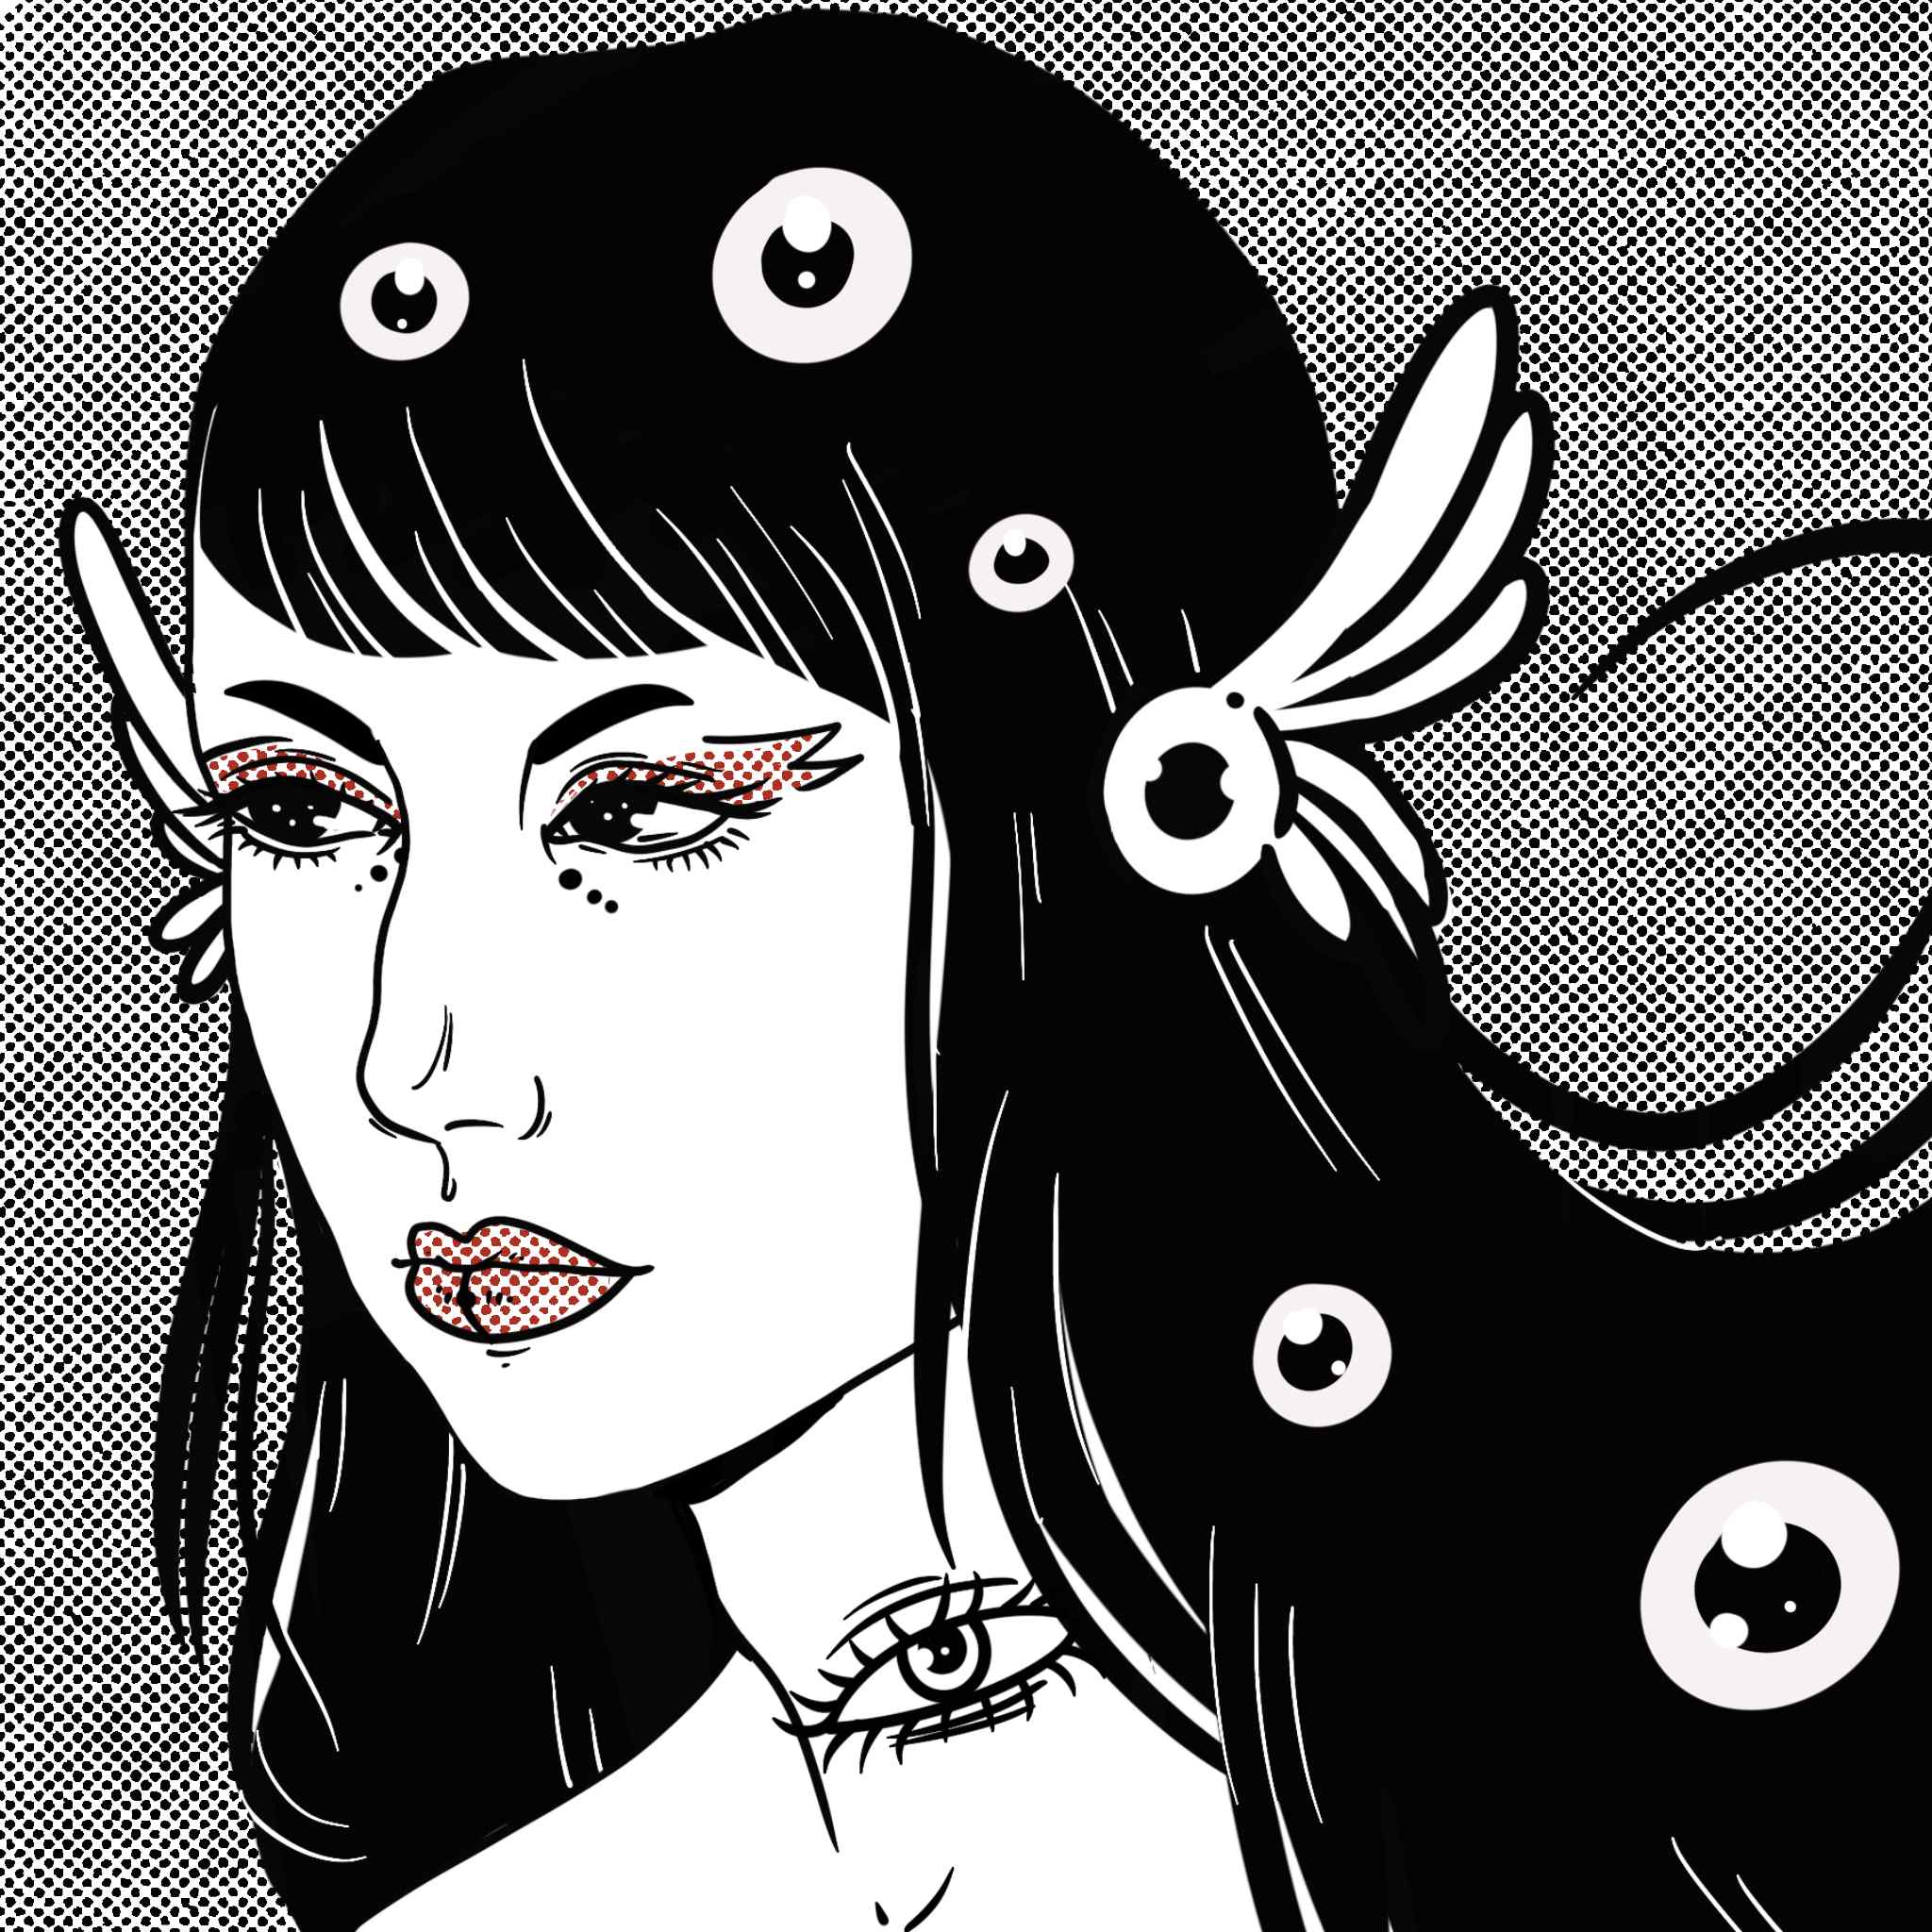 digital ink portrait of a woman with long black hair. There are eyes in her hair and an eye on her neck.